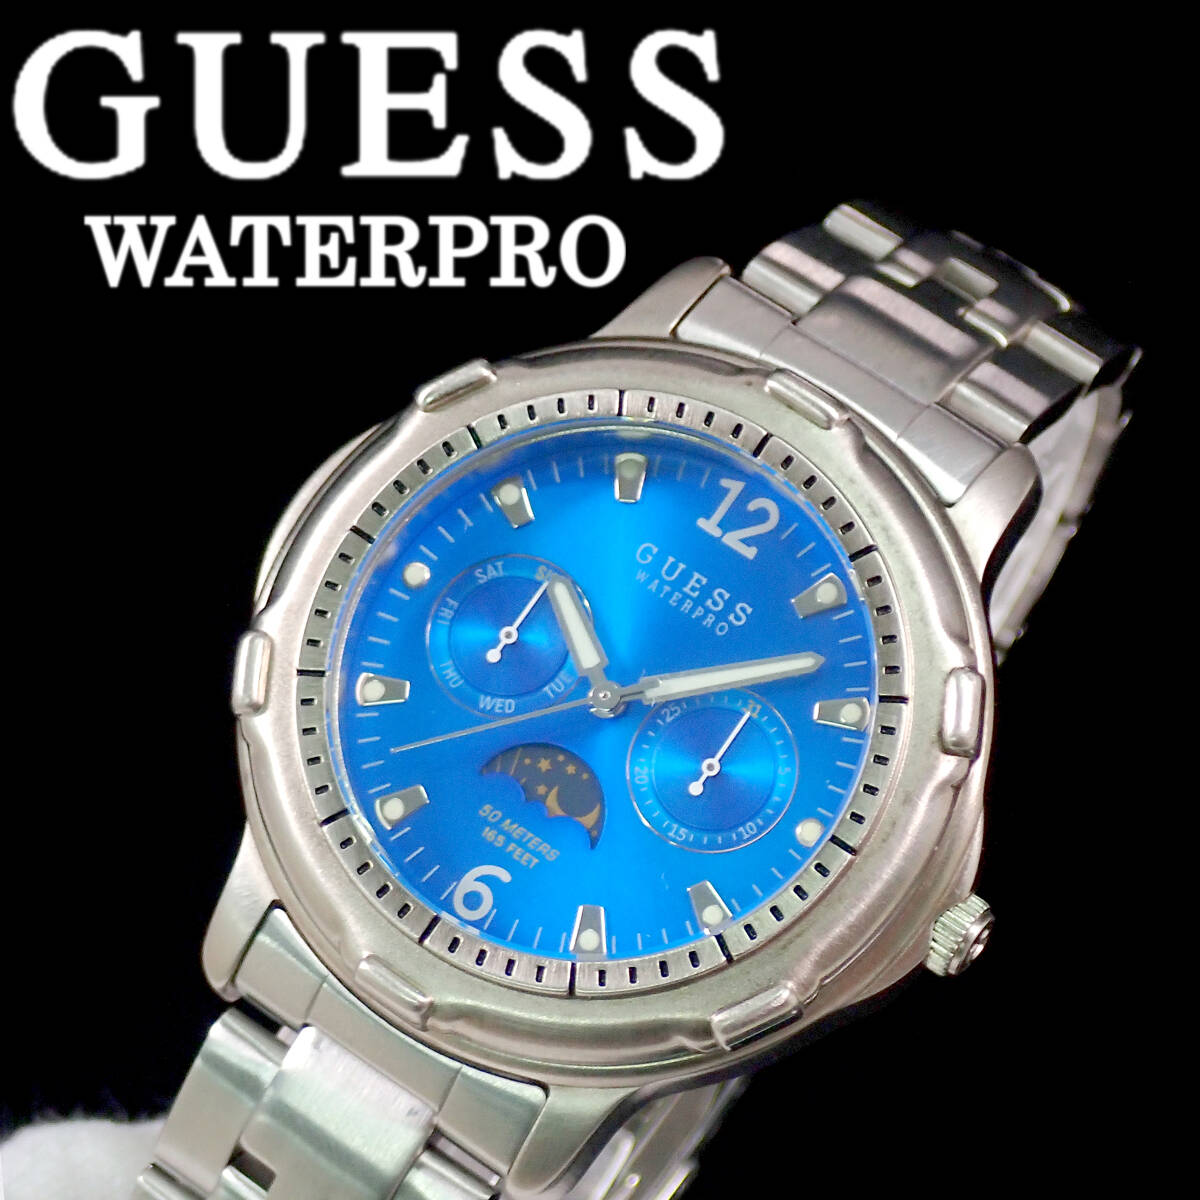 GUESS WATER PRO 50 METERS 165 FEET ブルー文字盤 点検動作品 _画像1